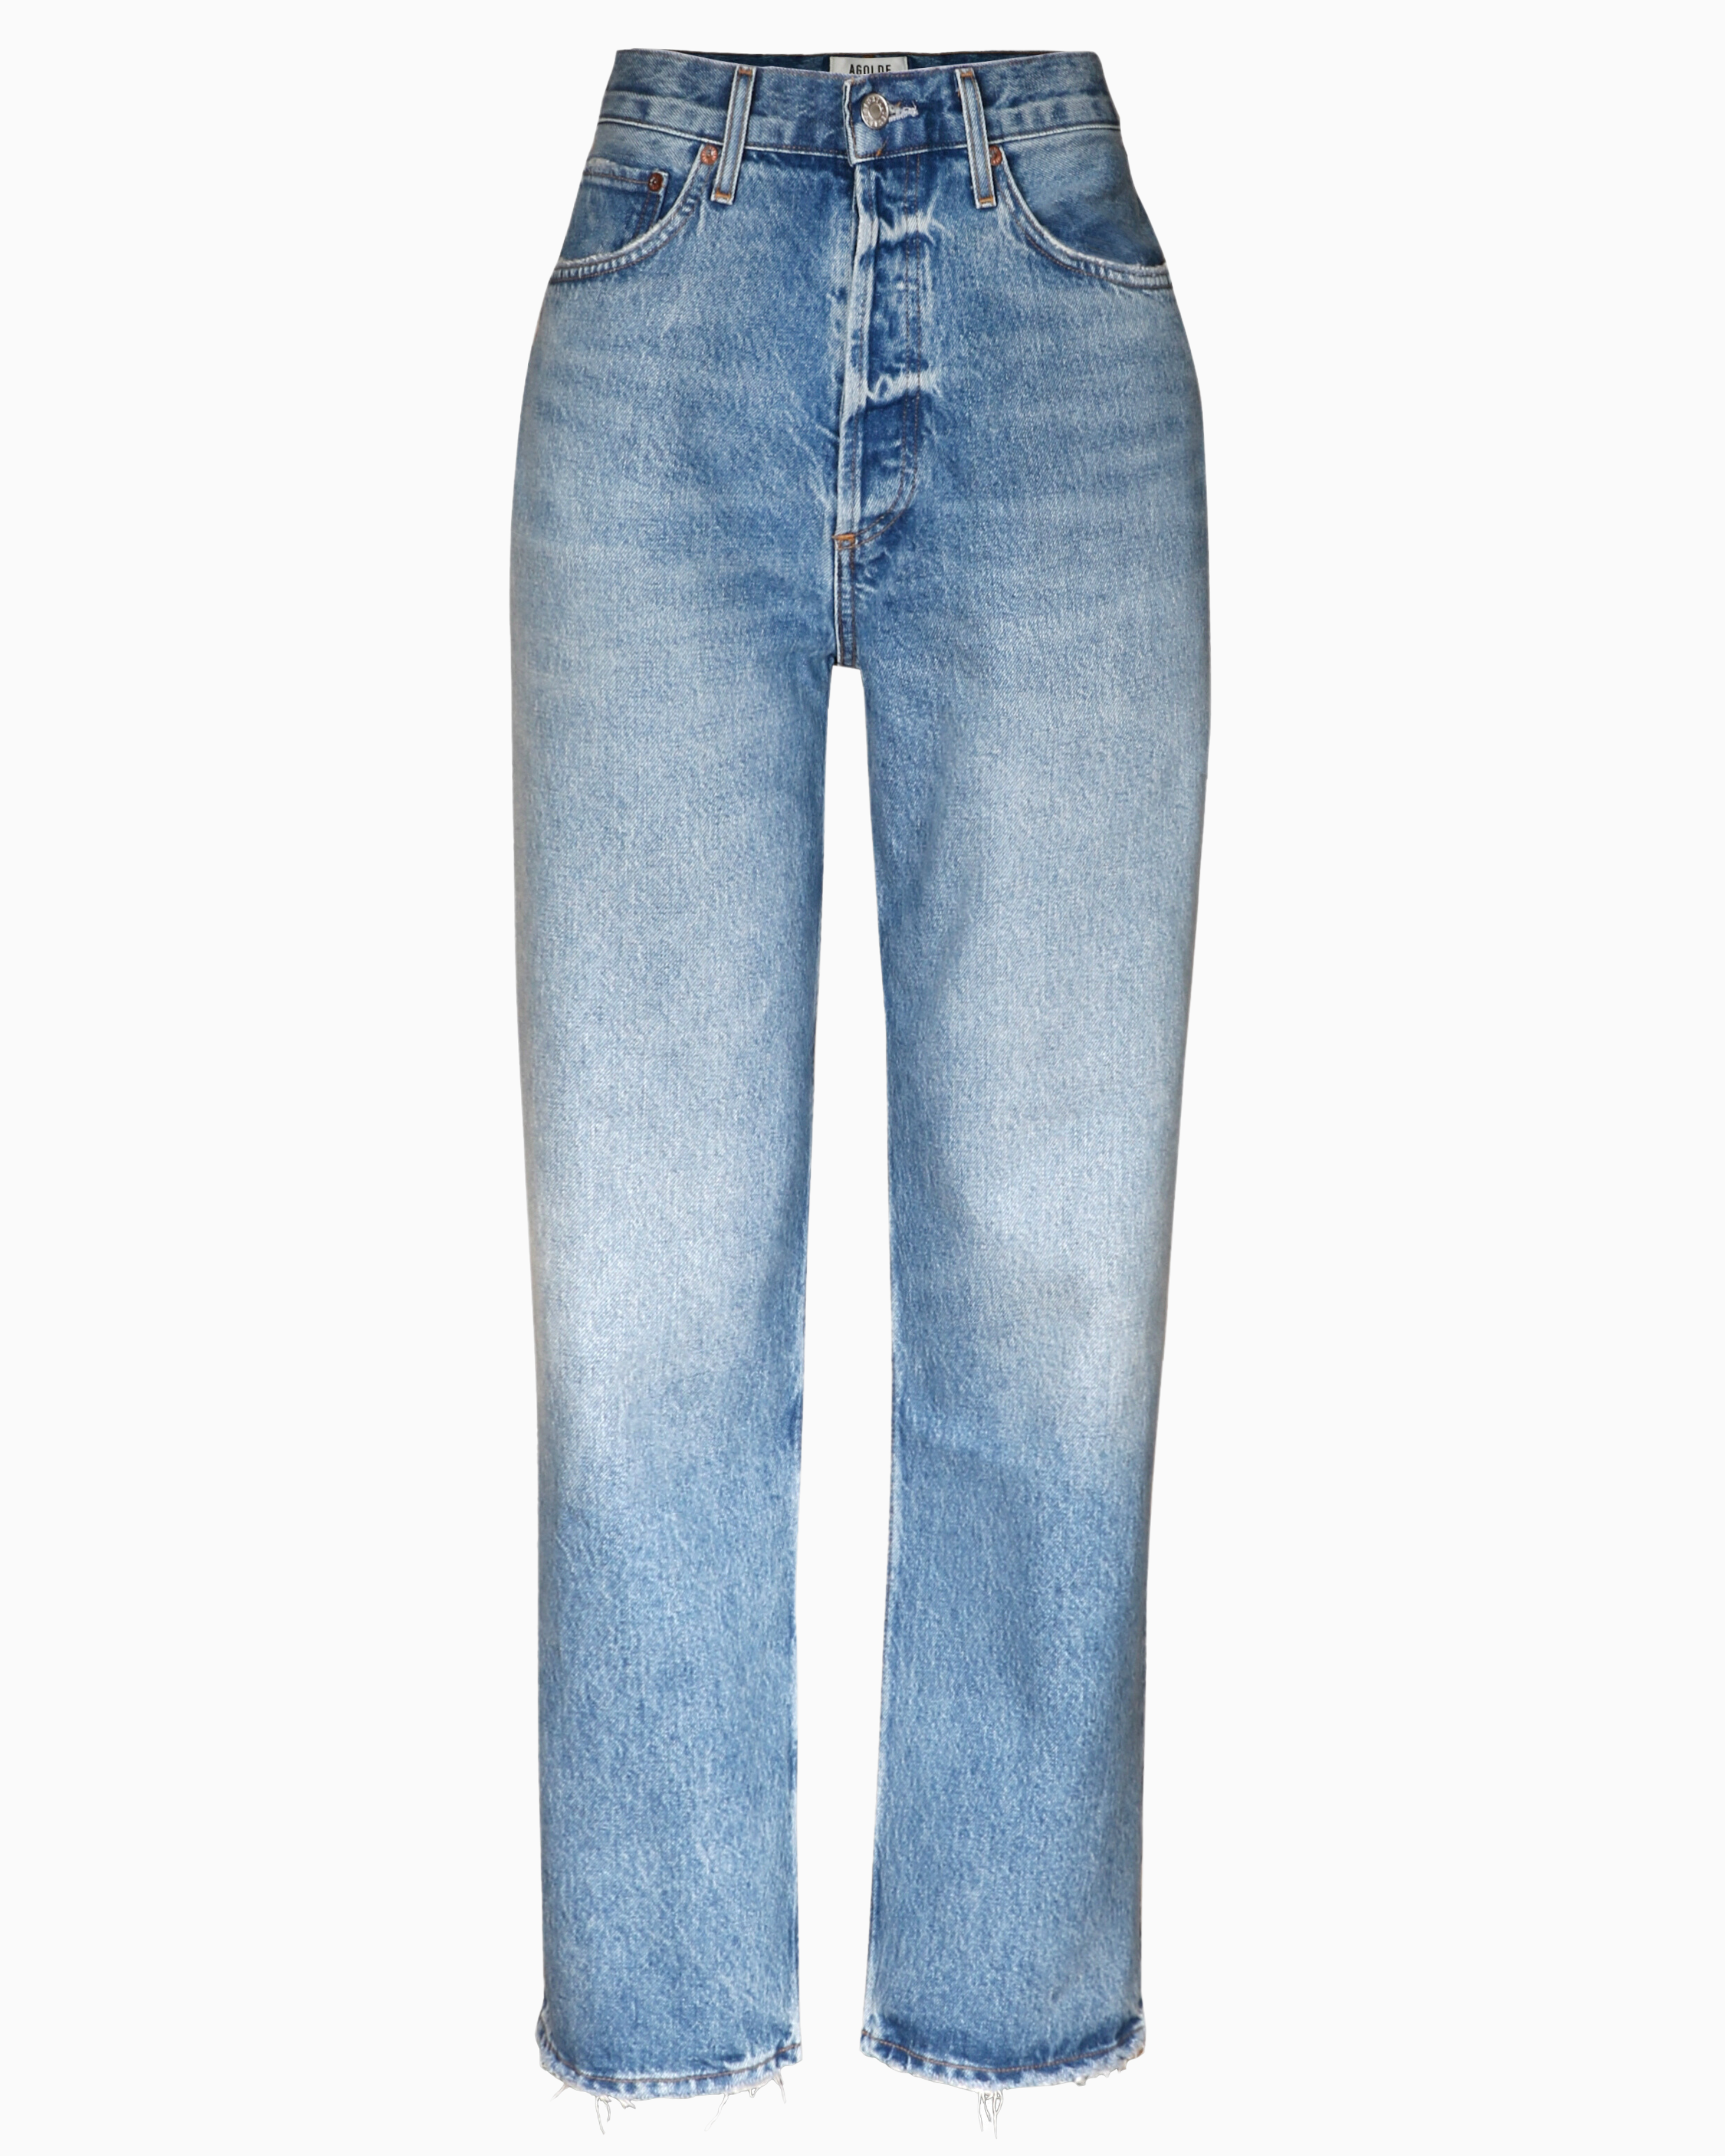 Agolde 90's Mid Rise Jean in Bound